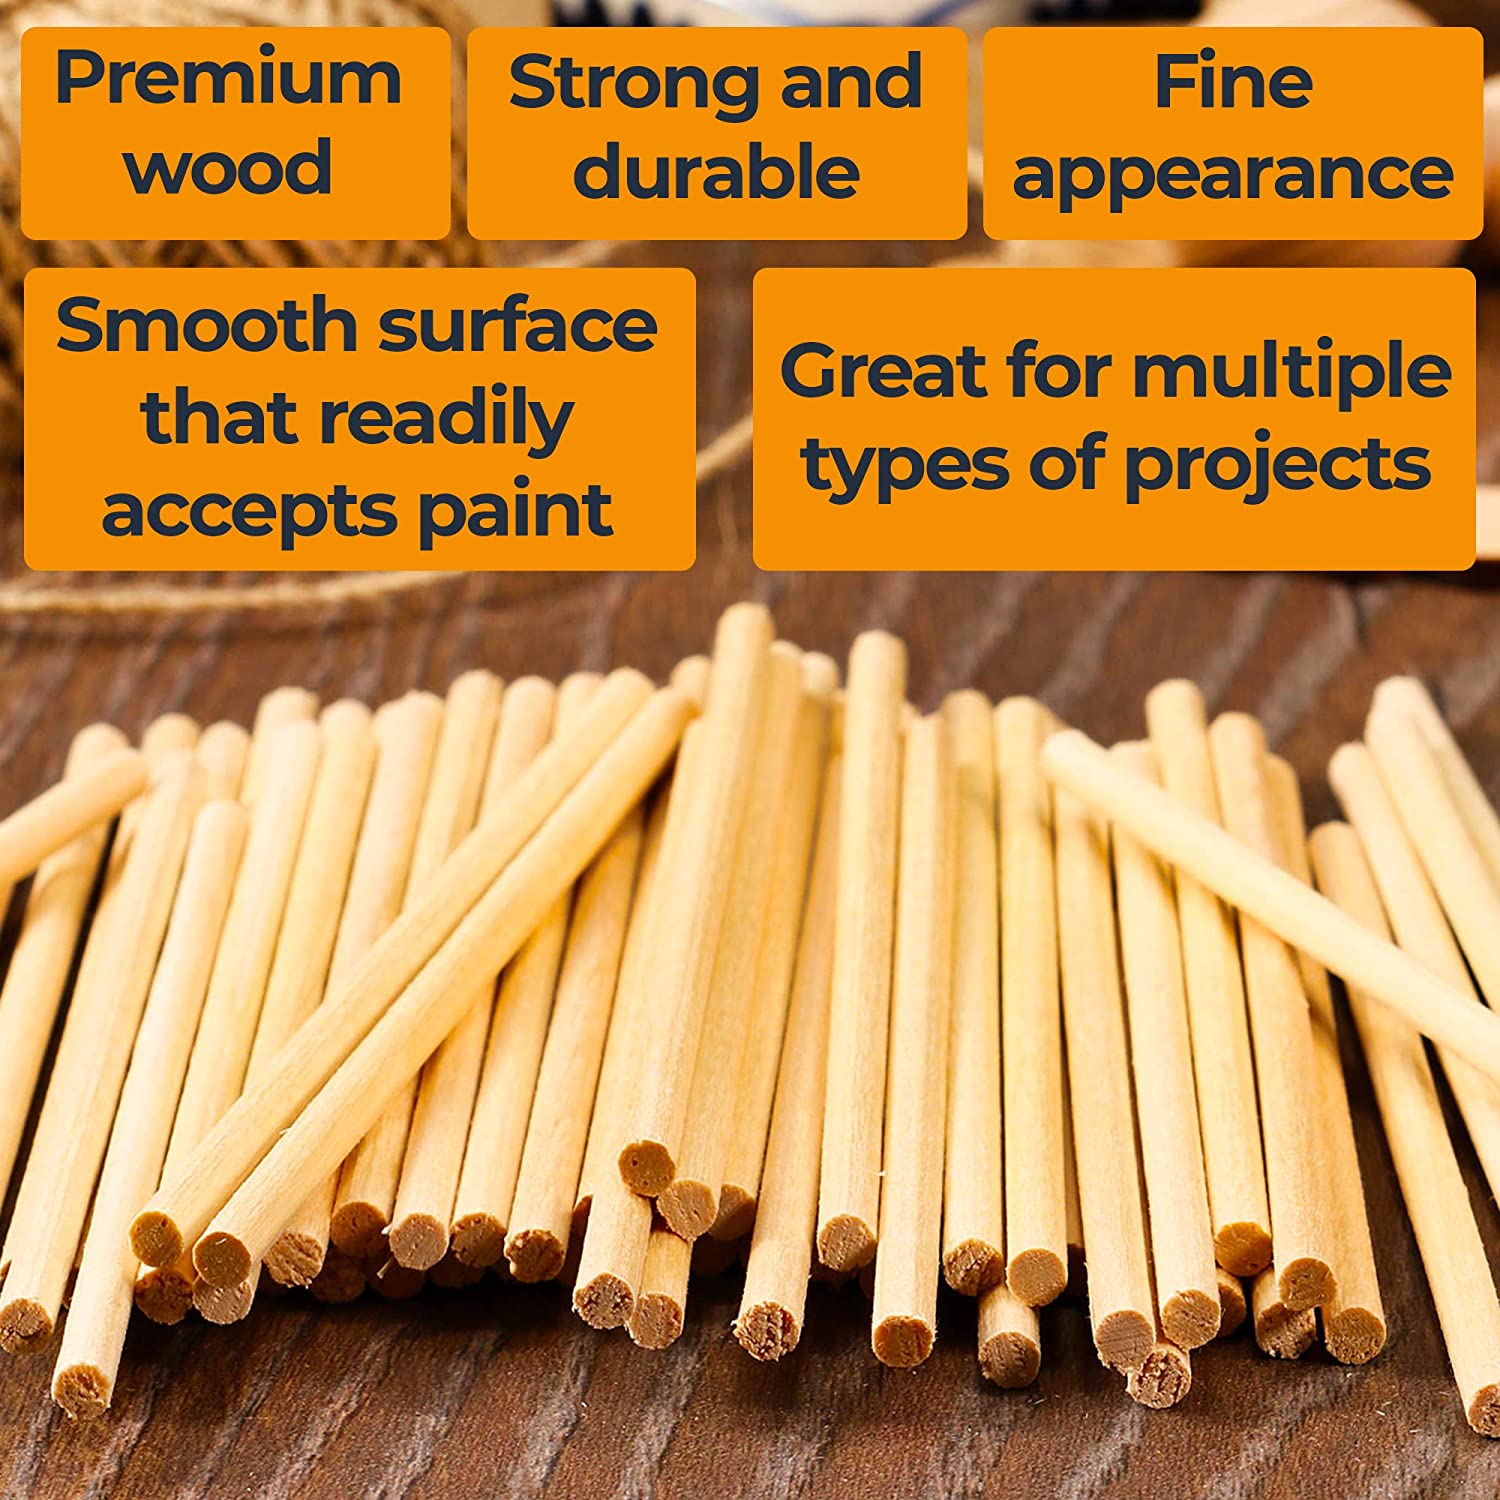 High quality wooden round shape dowel rods and stick (5).jpg